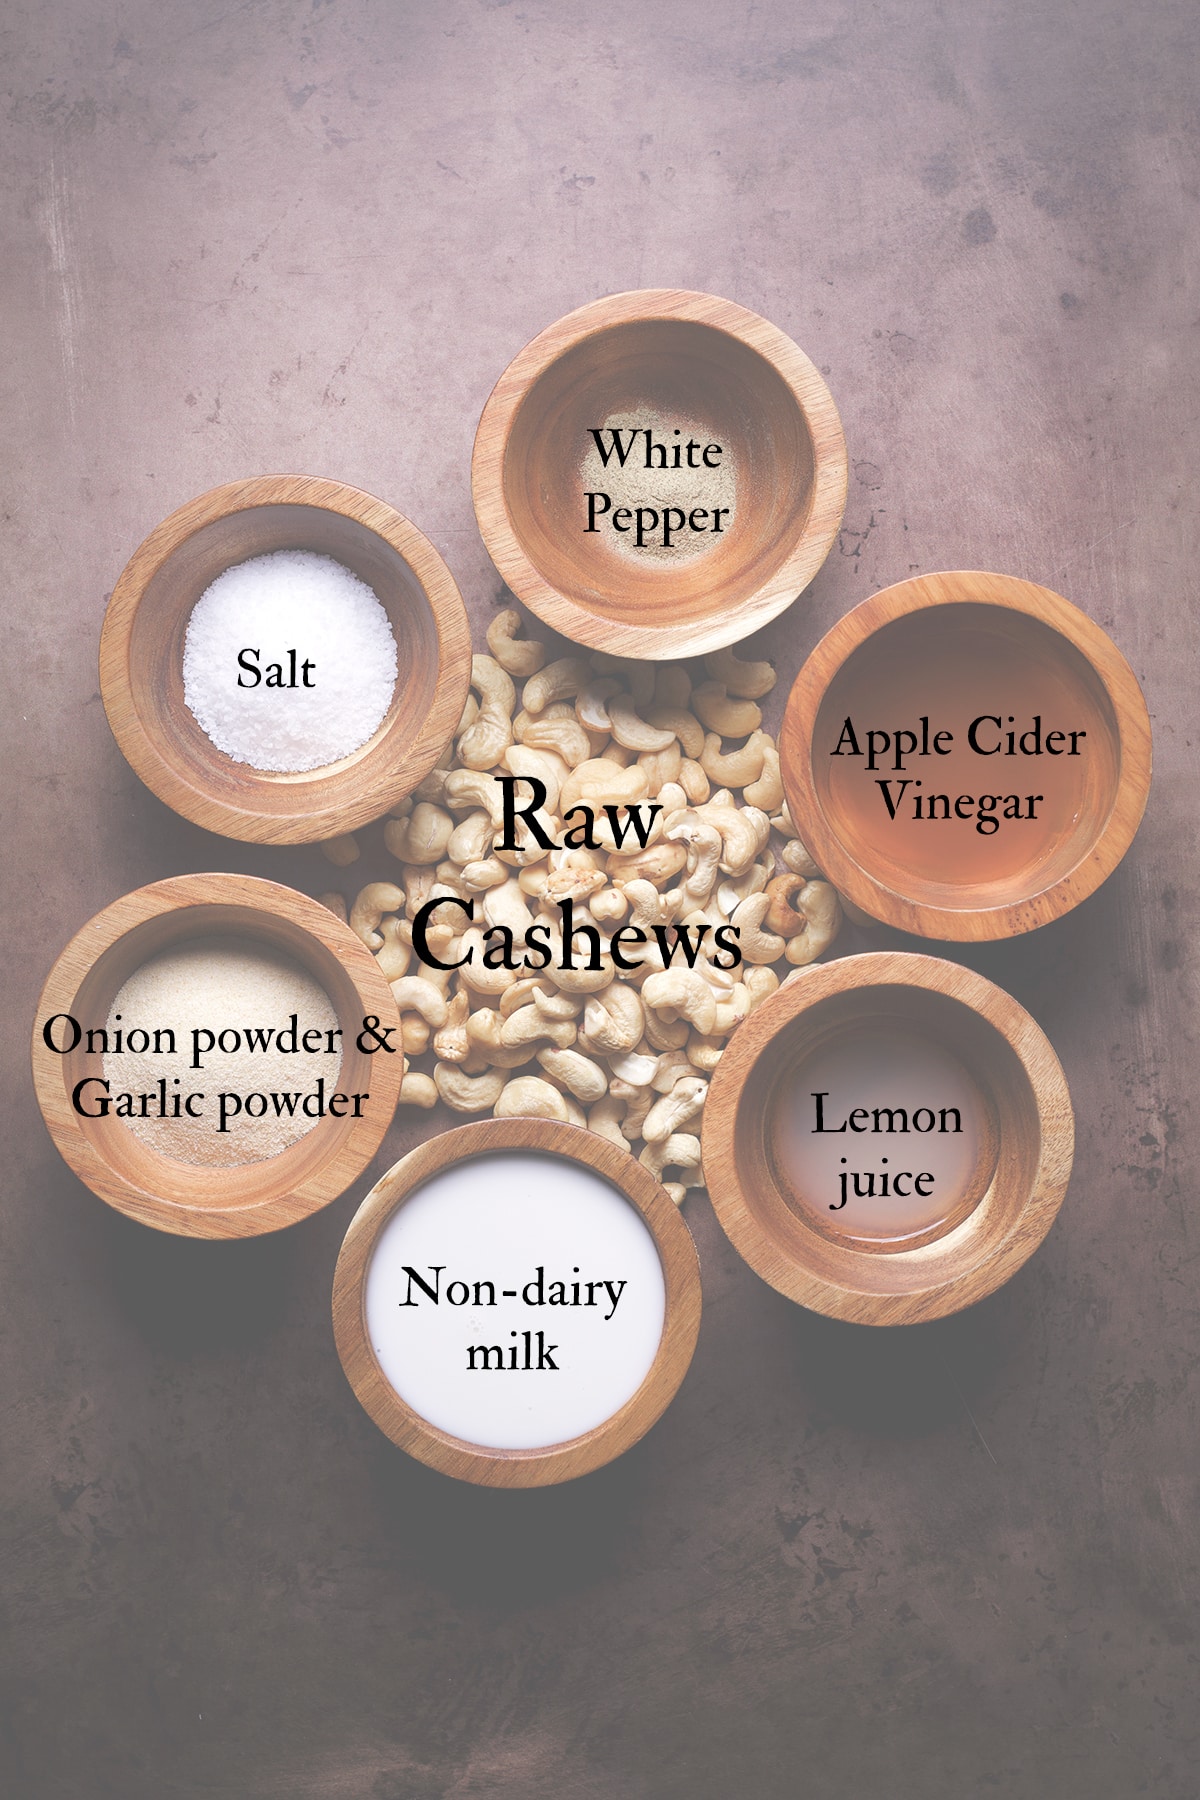 All the ingredients needed to make Vegan Sour Cream with Cashews.